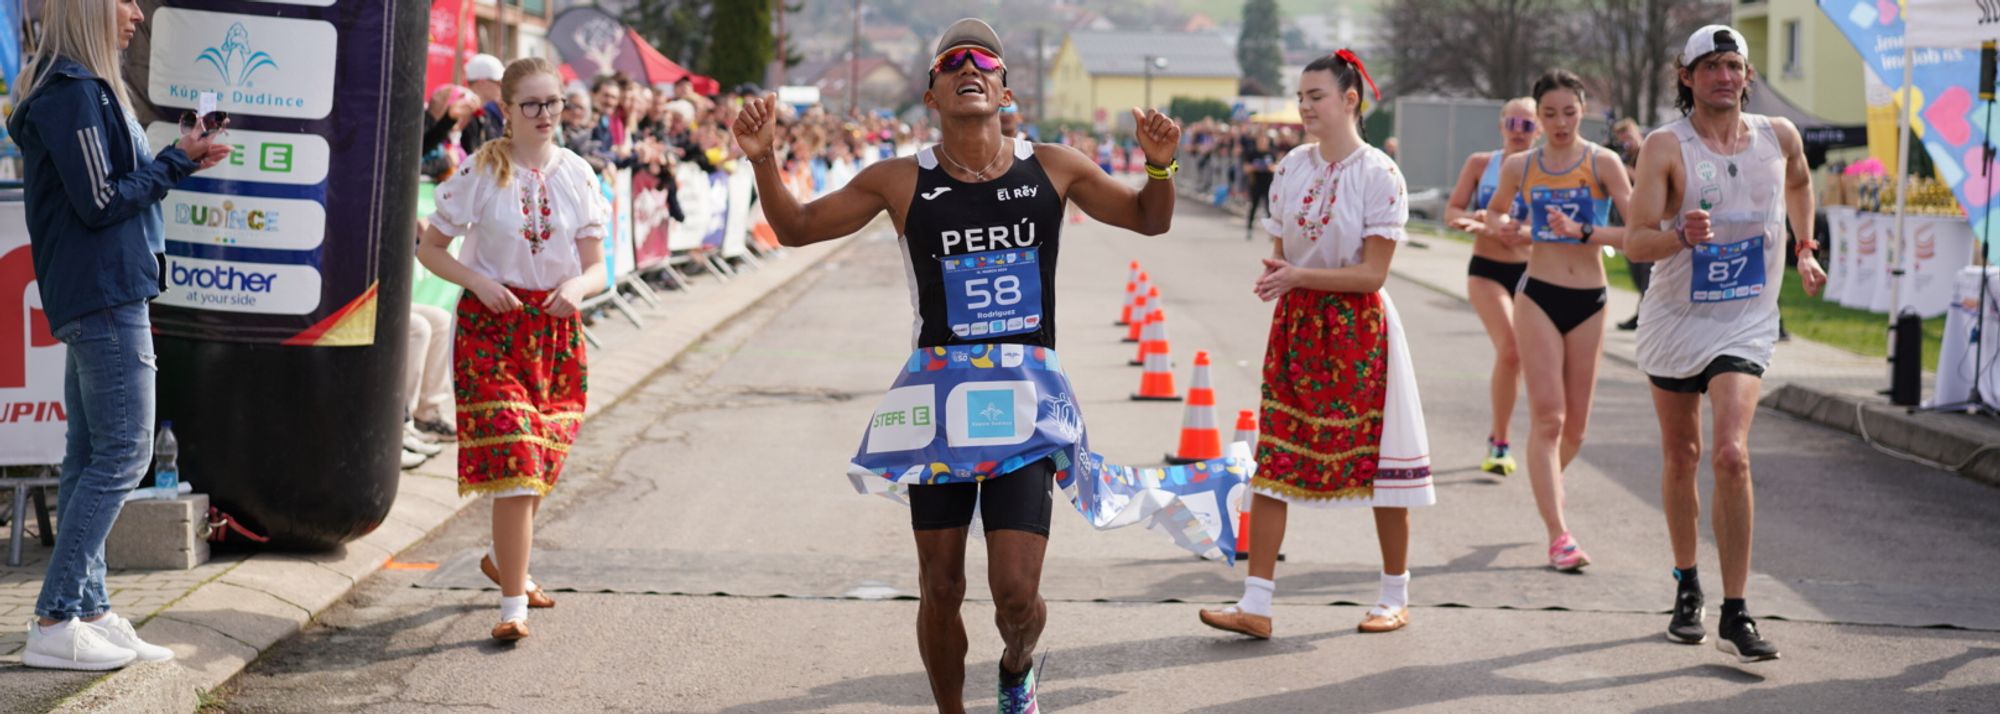 The Dudinska 50 – the second World Athletics Race Walking Tour Gold event of the year – was a triumph for Peru